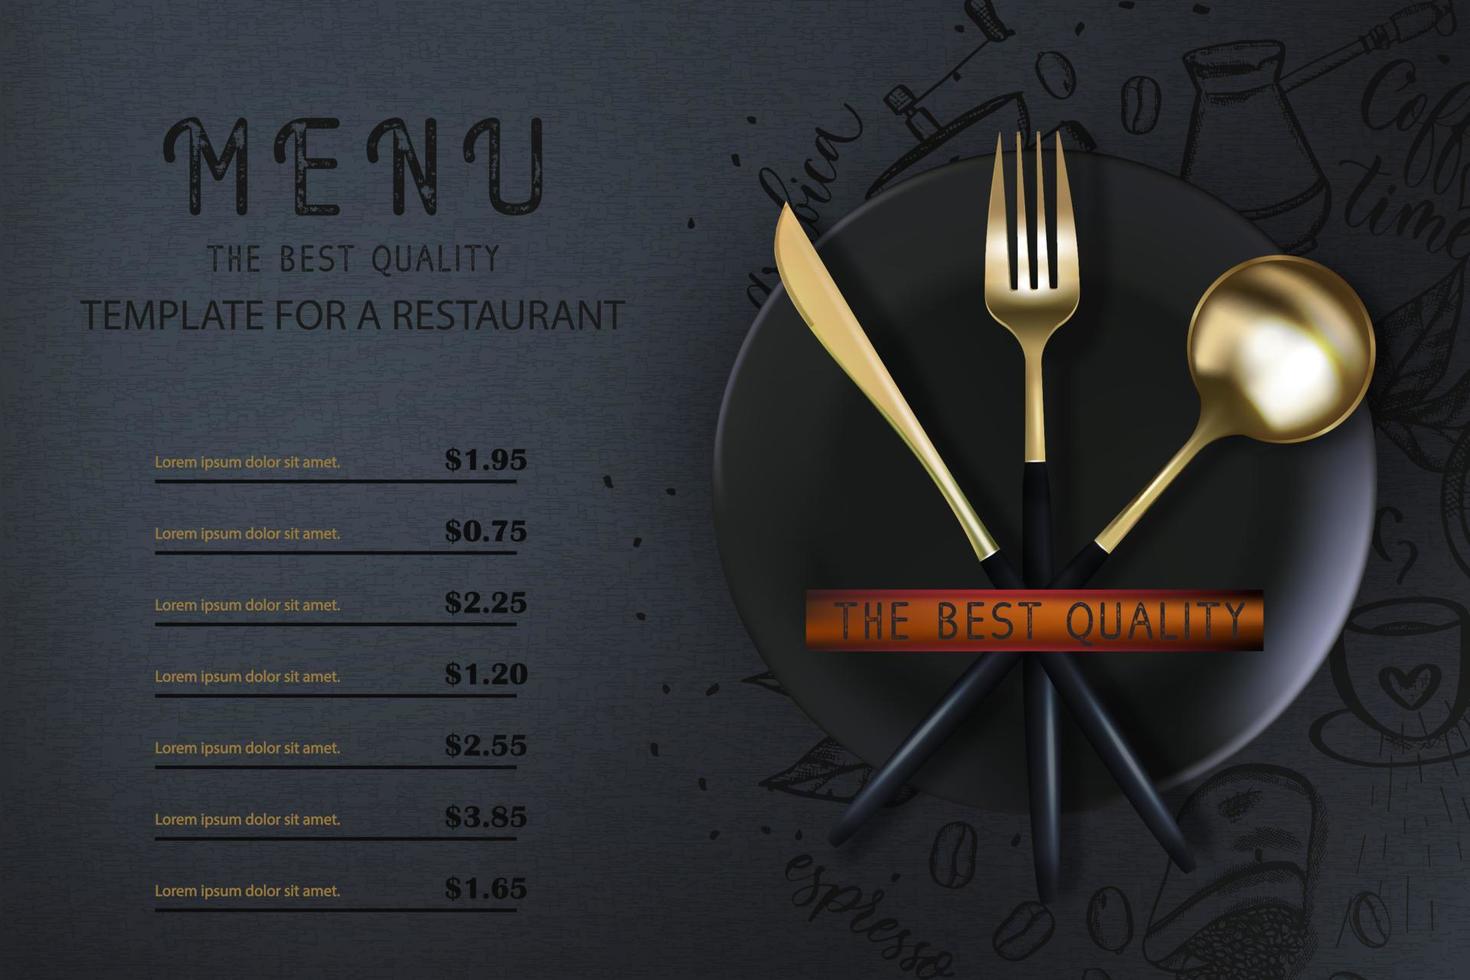 Realistic 3D golden fork and spoon on a black grunge background. Fashionable modern poster for a restaurant. Top view vector illustration.